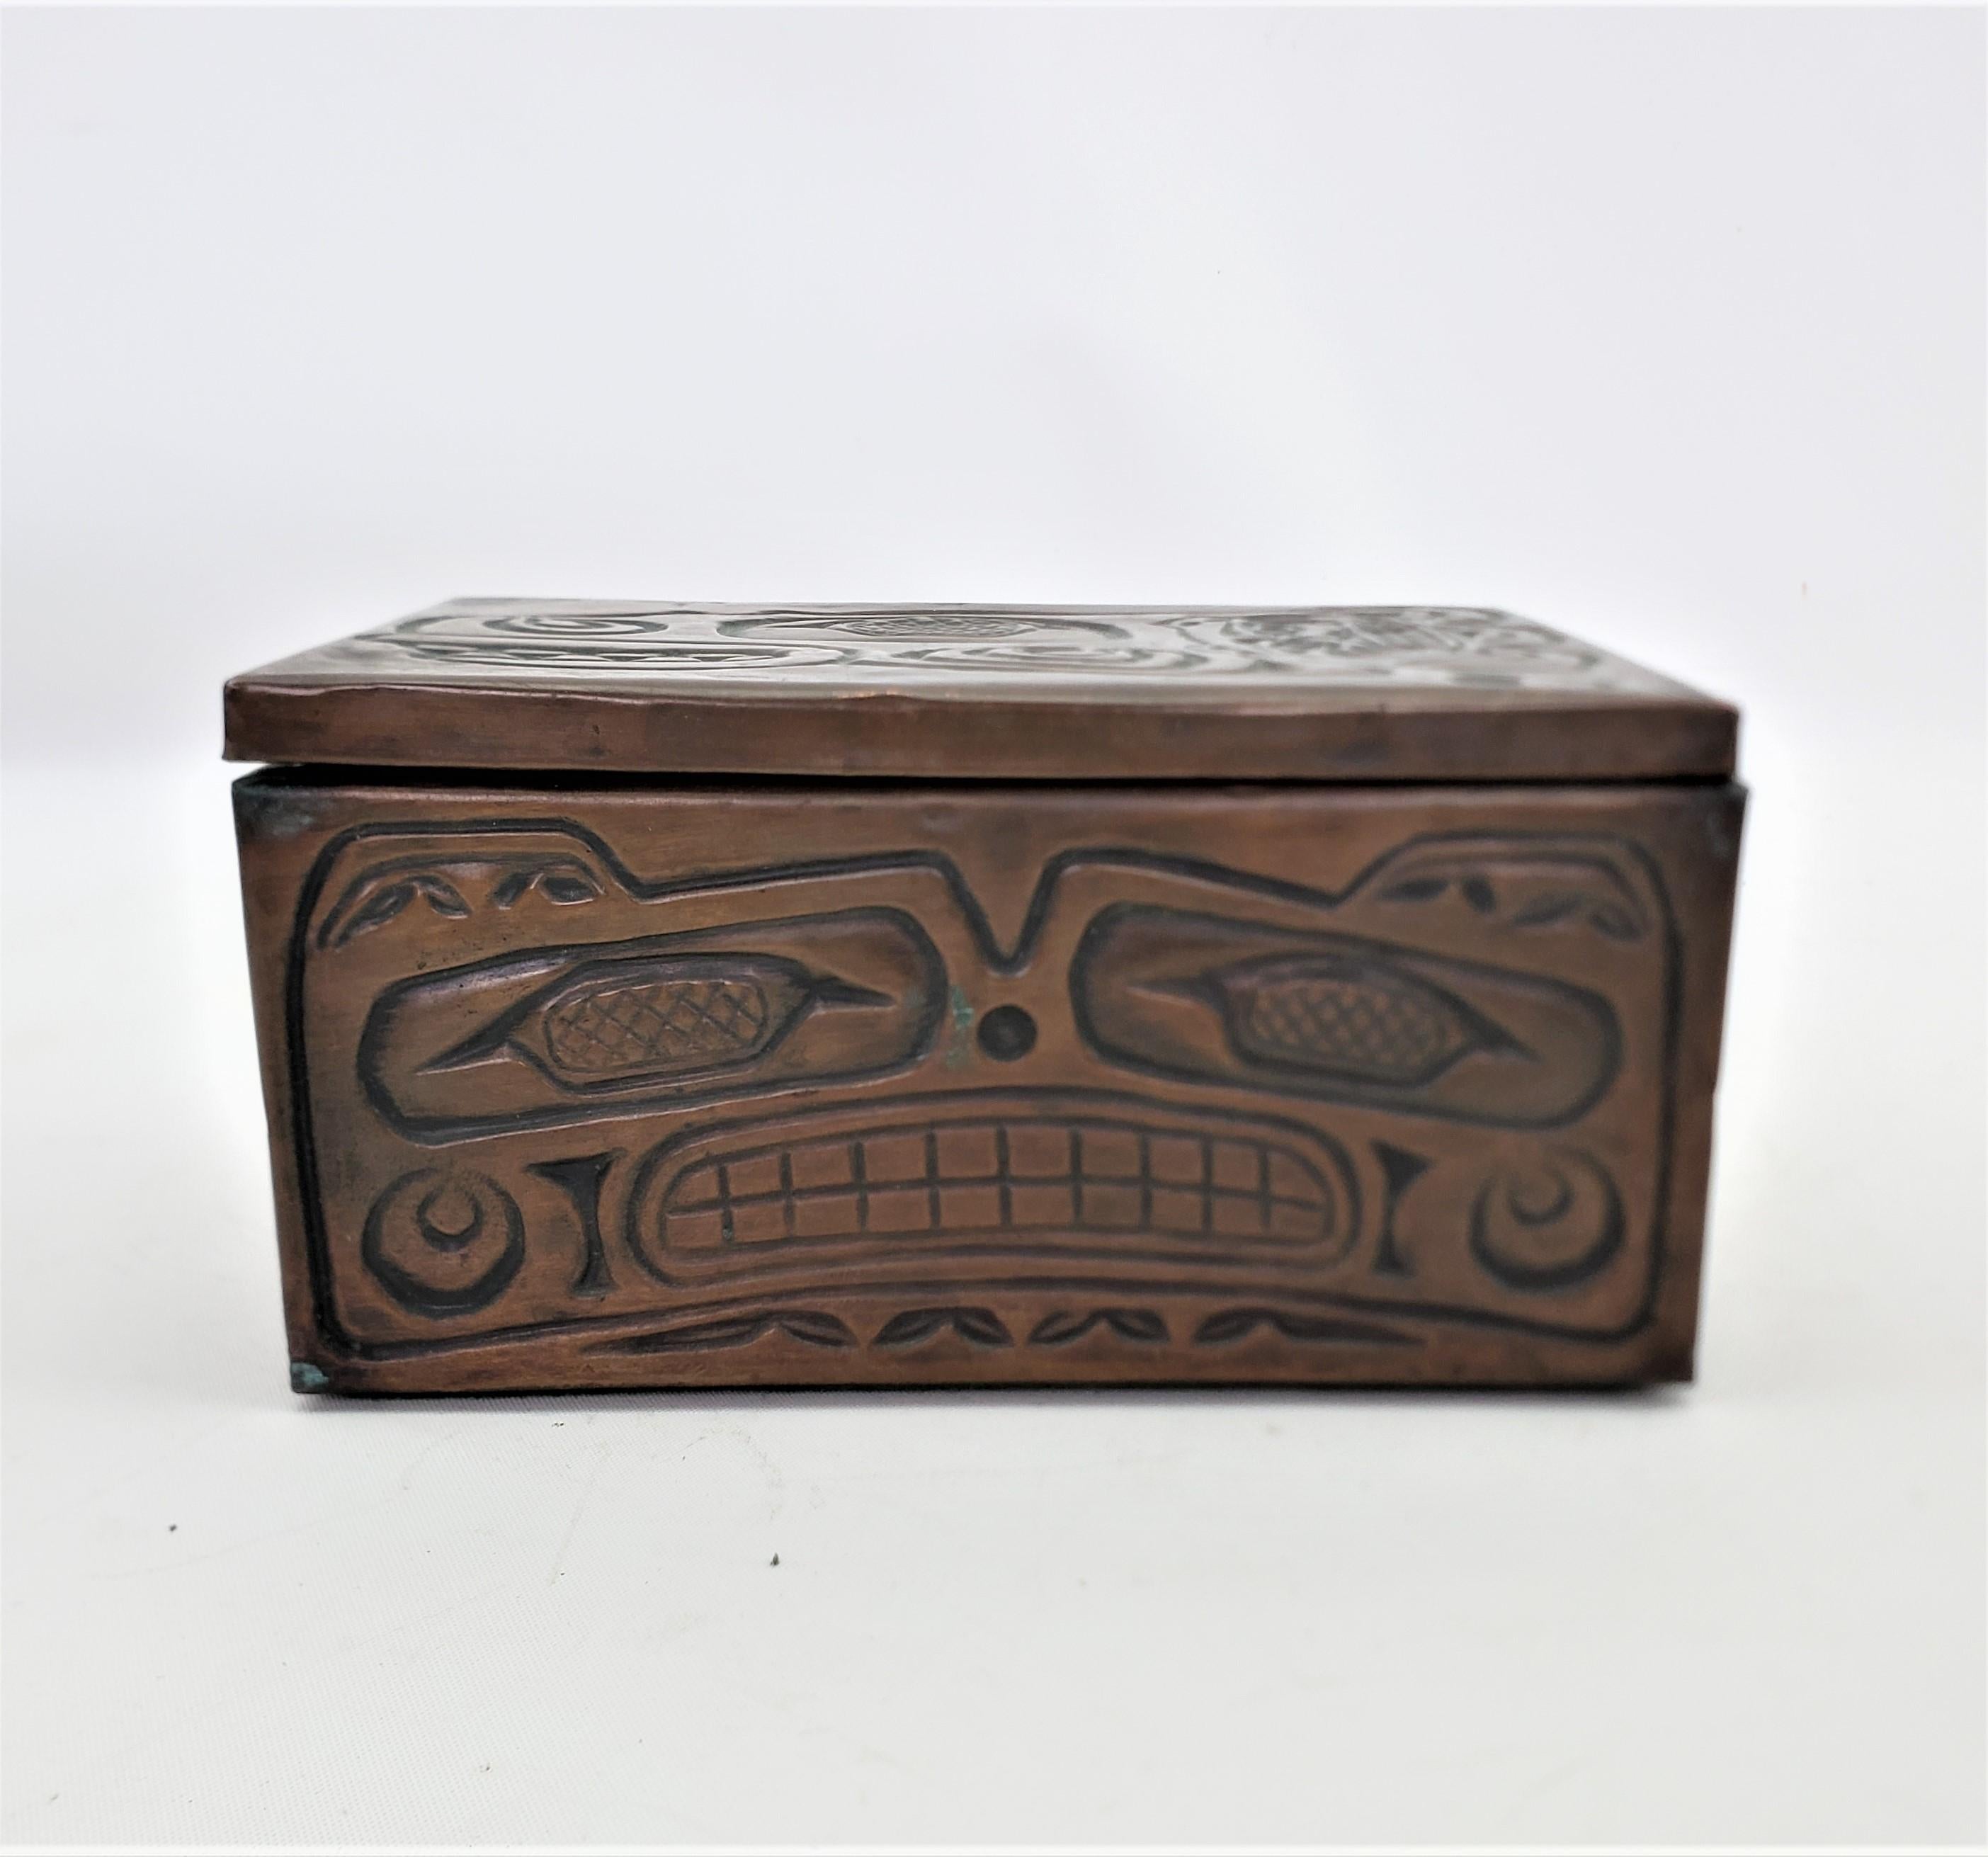 Native American Mid-Century Era West Coast Haida Styled Copper Covered Box with Repouse Decor